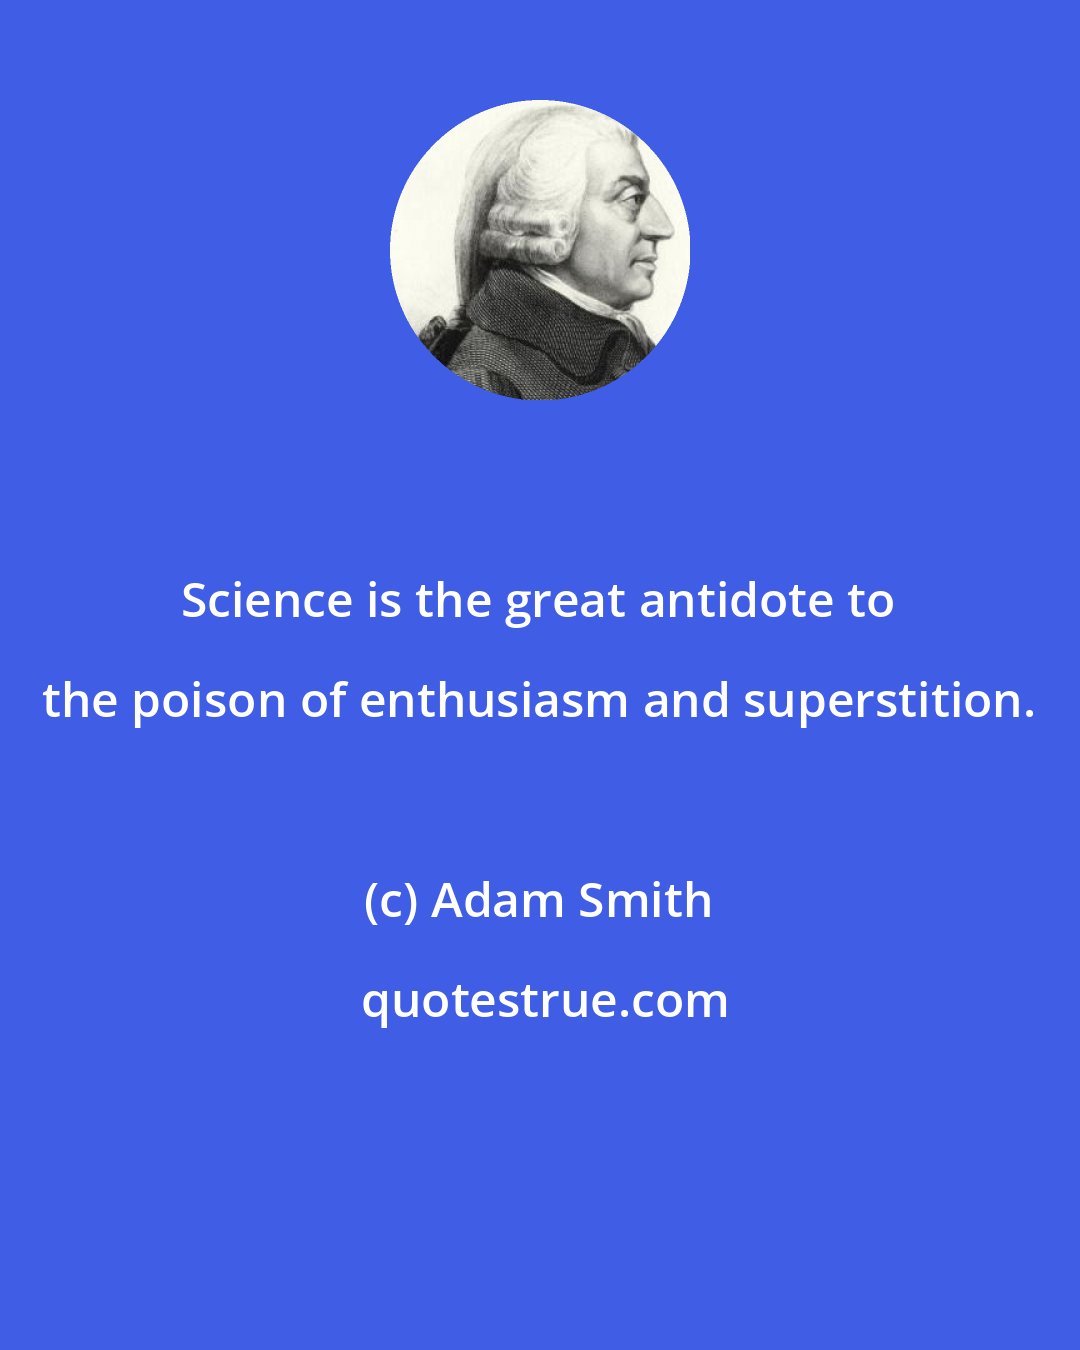 Adam Smith: Science is the great antidote to the poison of enthusiasm and superstition.